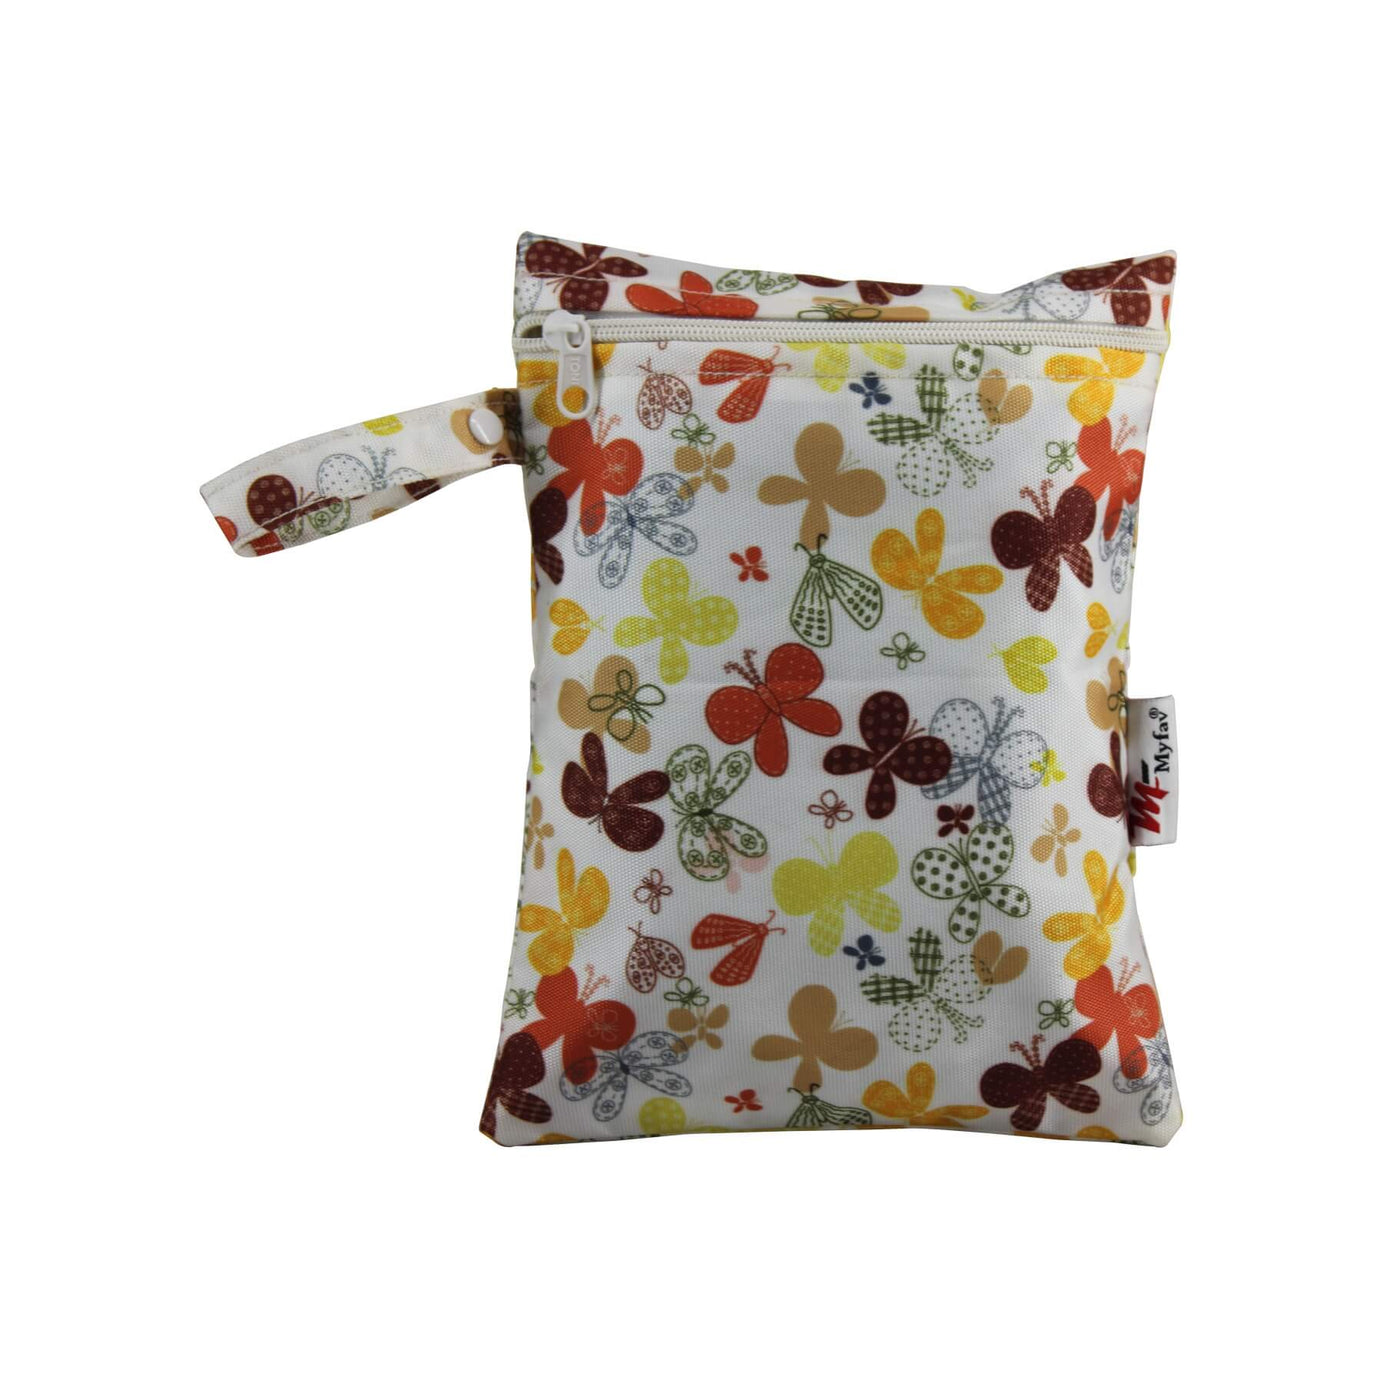 My Fav Butterfly Print Multiutility Wet Dry Pouch/Diaper Bag/Travel Pouch/Travel Kit